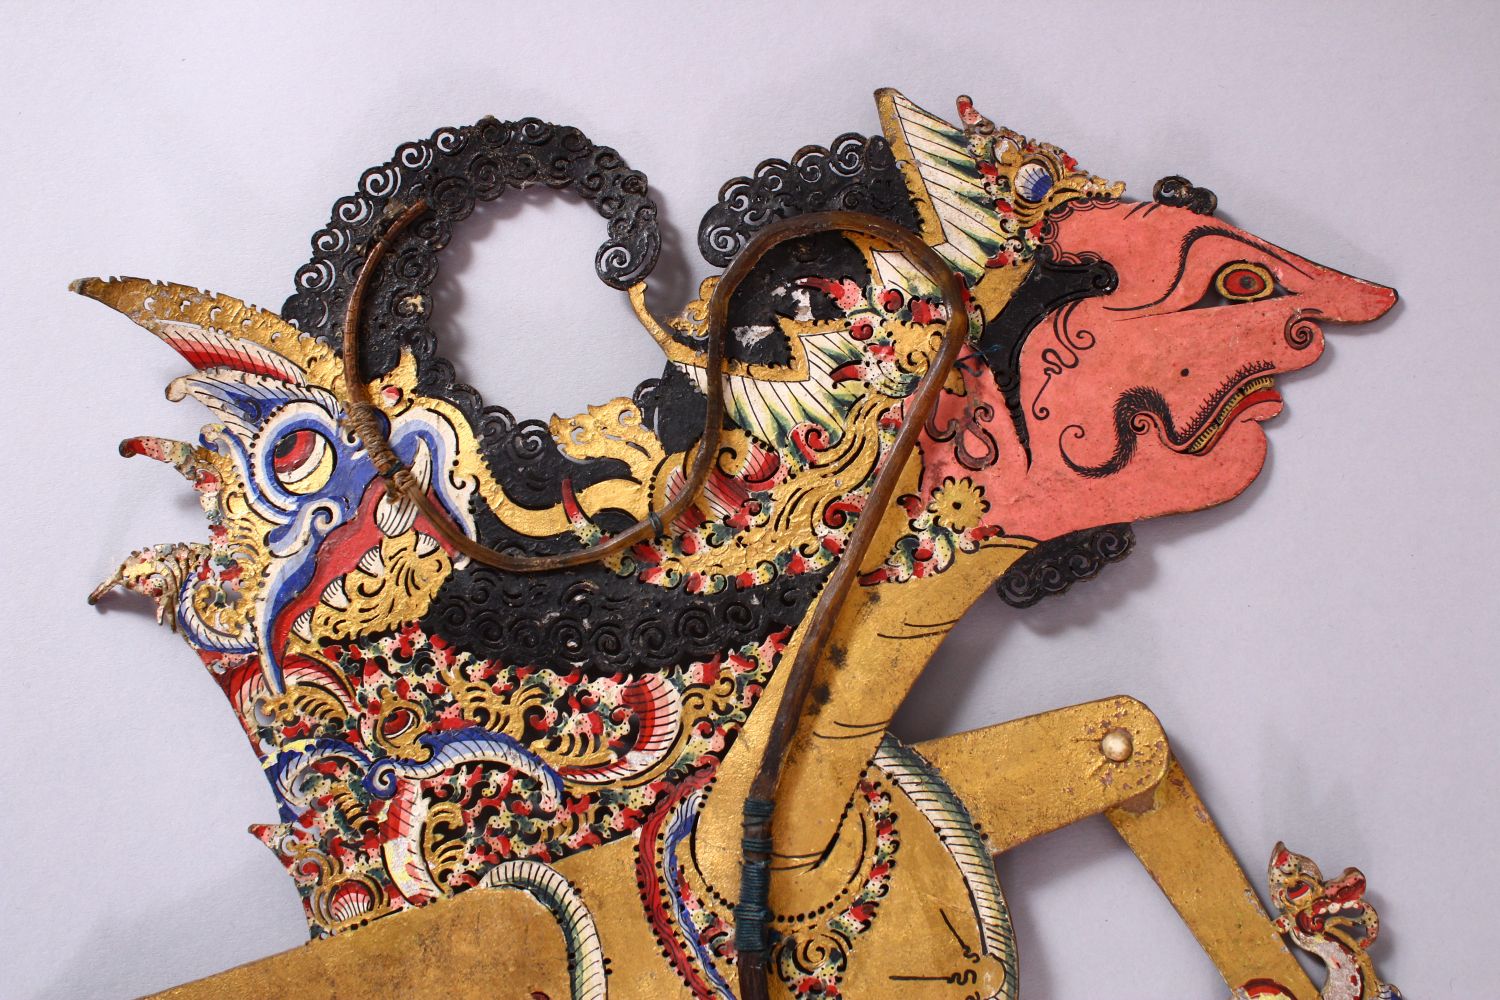 A LARGE 19TH CENTURY INDONESIAN SHADOW PUPPET WITH RHINO HORN STICKS, 73cm. - Image 2 of 7